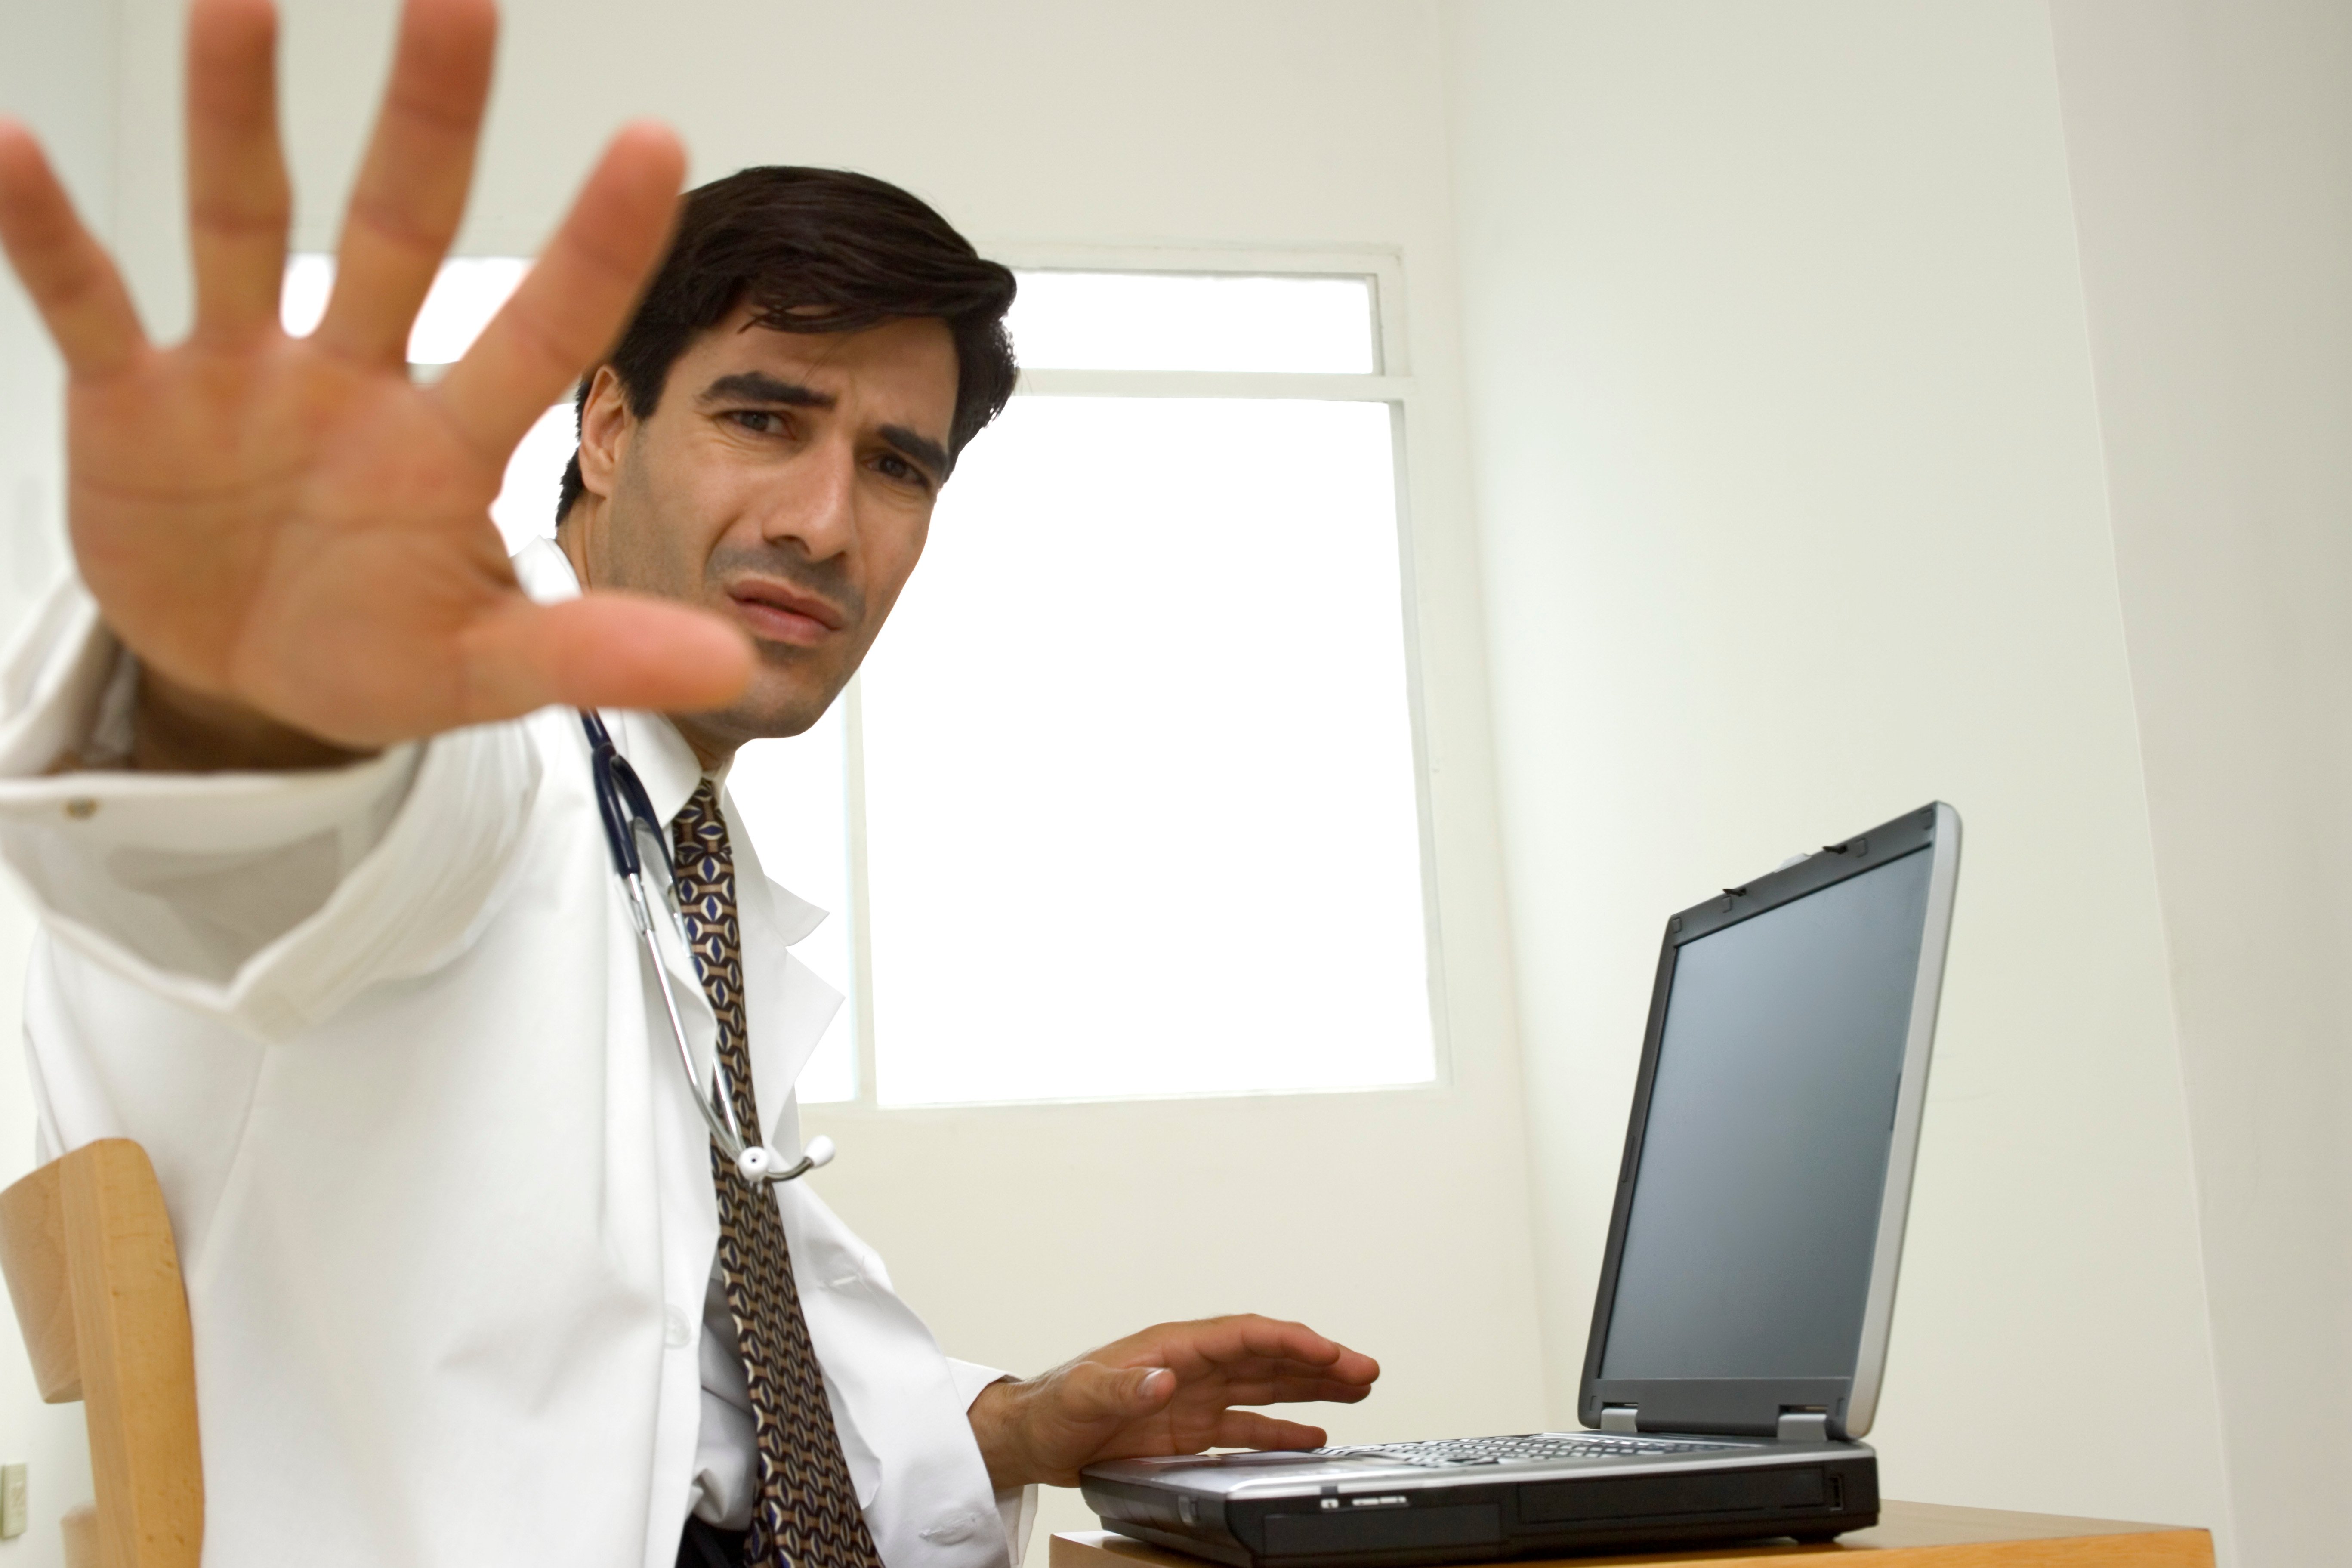 A doctor at a desk holding up his hand to say stop